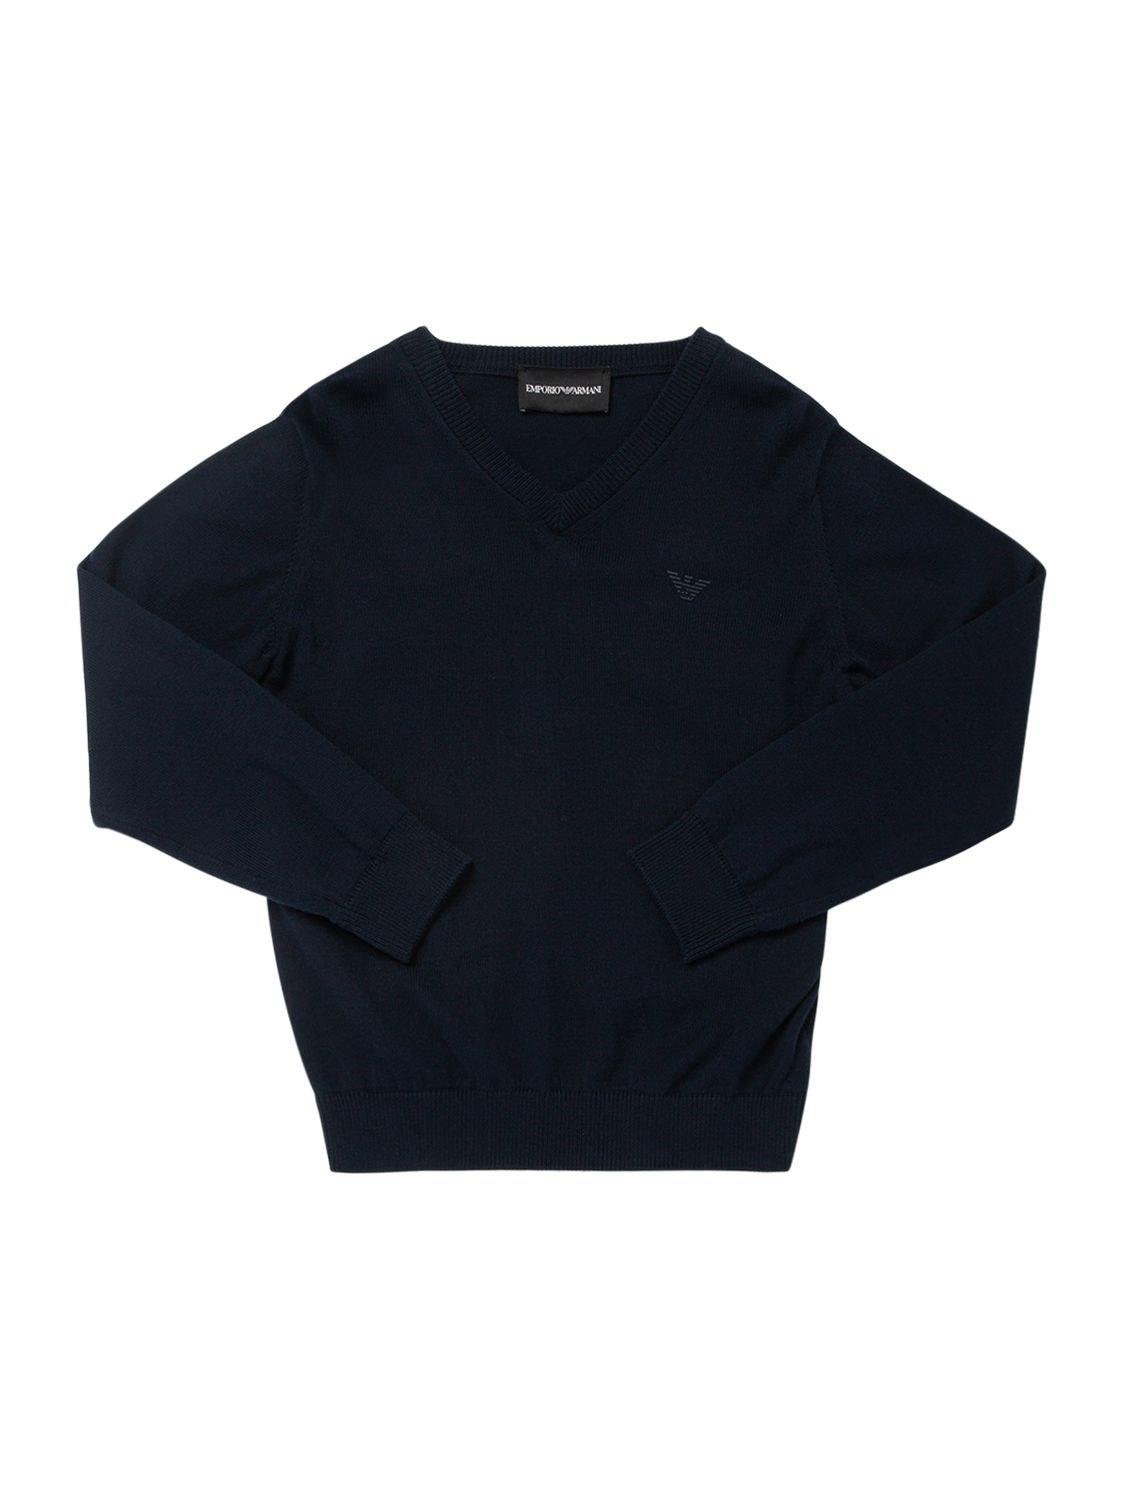 Cotton Blend Knit Sweater by EMPORIO ARMANI